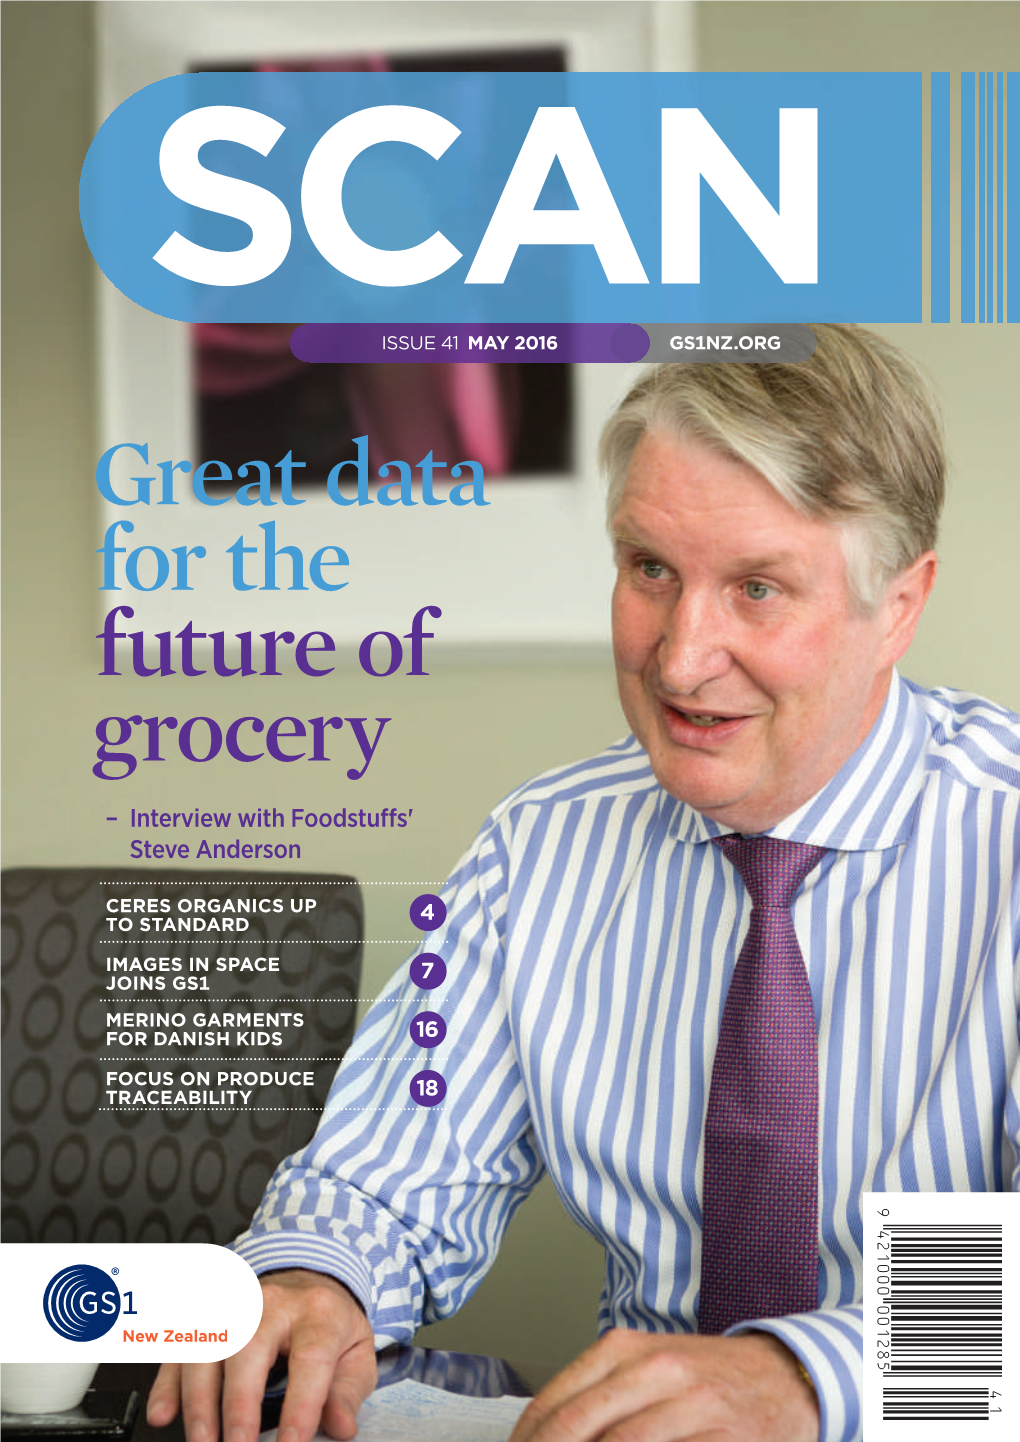 SCANISSUE 41 MAY 2016 GS1NZ.ORG Great Data for the Future of Grocery – Interview with Foodstuﬀ S' Steve Anderson